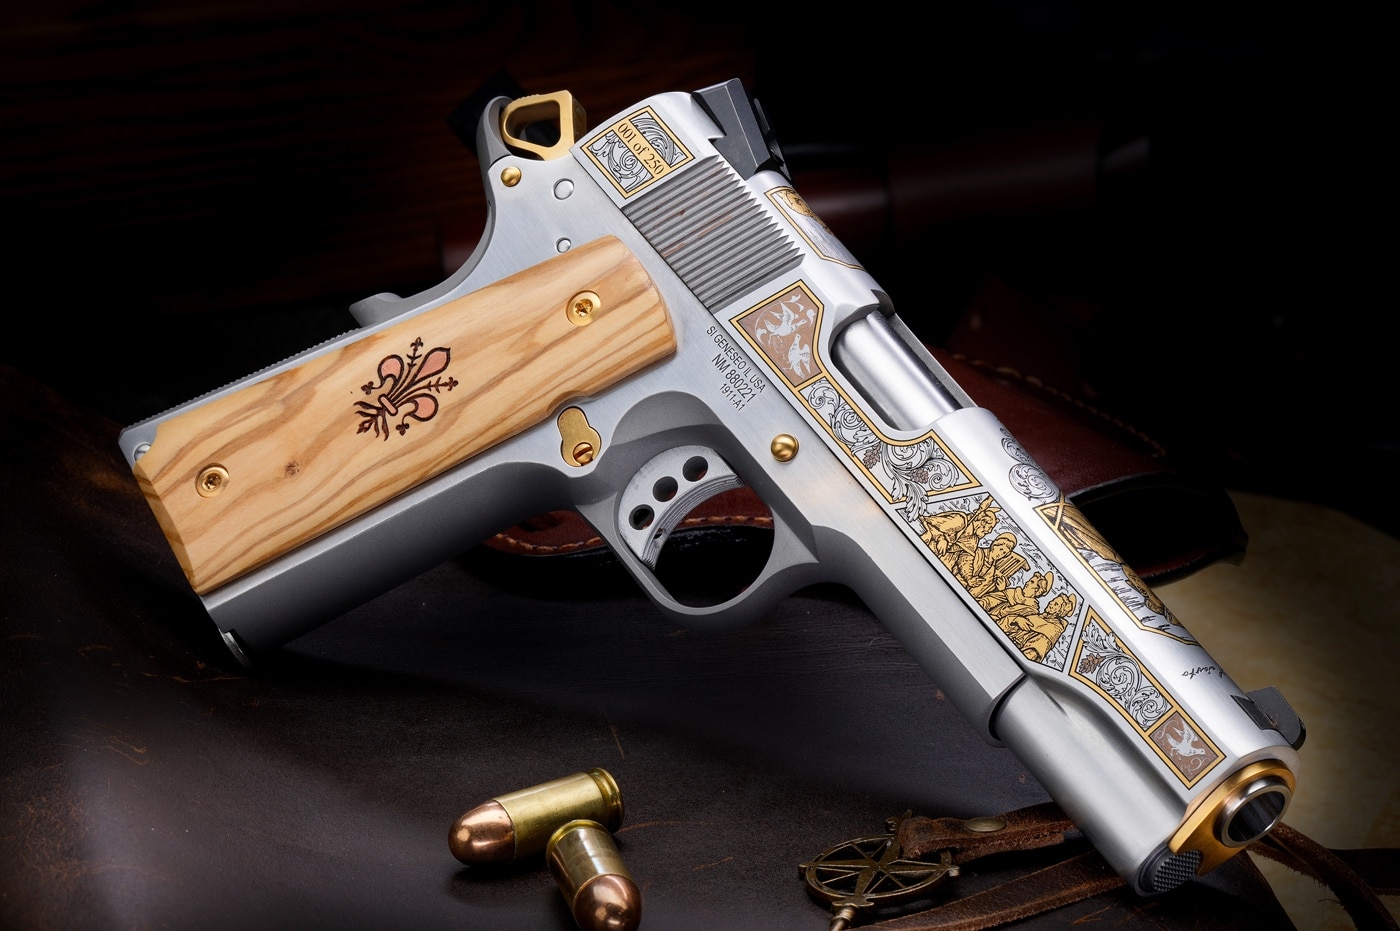 Shown is the Andrea del Sarto model of Springfield Garrison that has been heavily customized by SK Guns. These pistols are extremely detailed handguns that offer a high degree of interest for collectors of high end handguns.